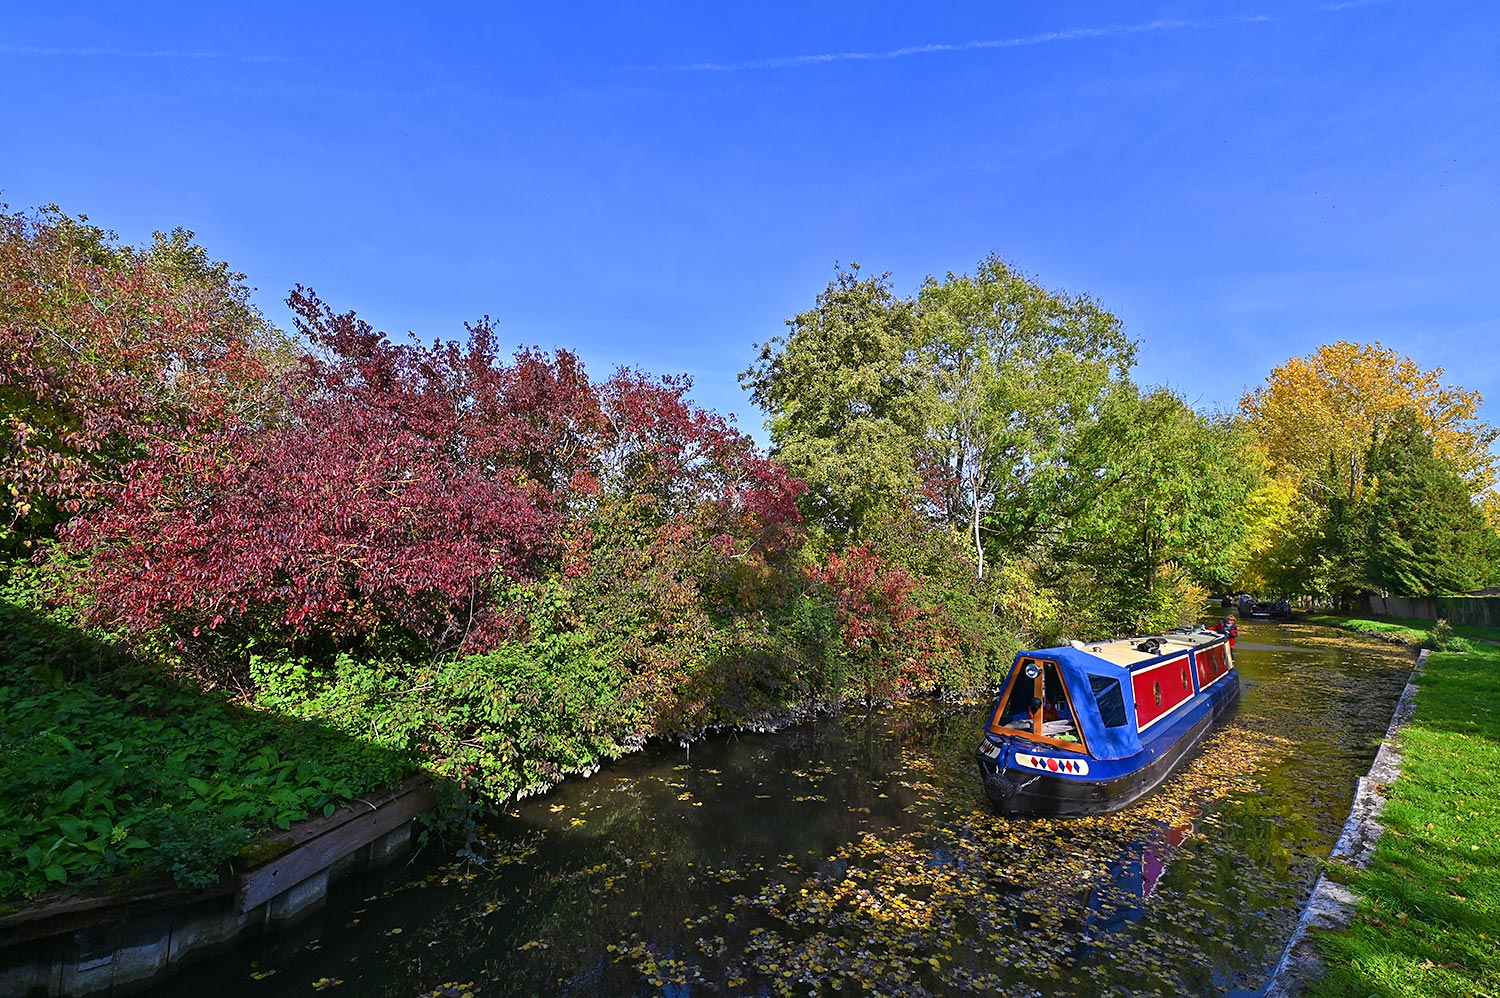 Picture of a canal boat cruising through fallen autumn leaves floating on a canal